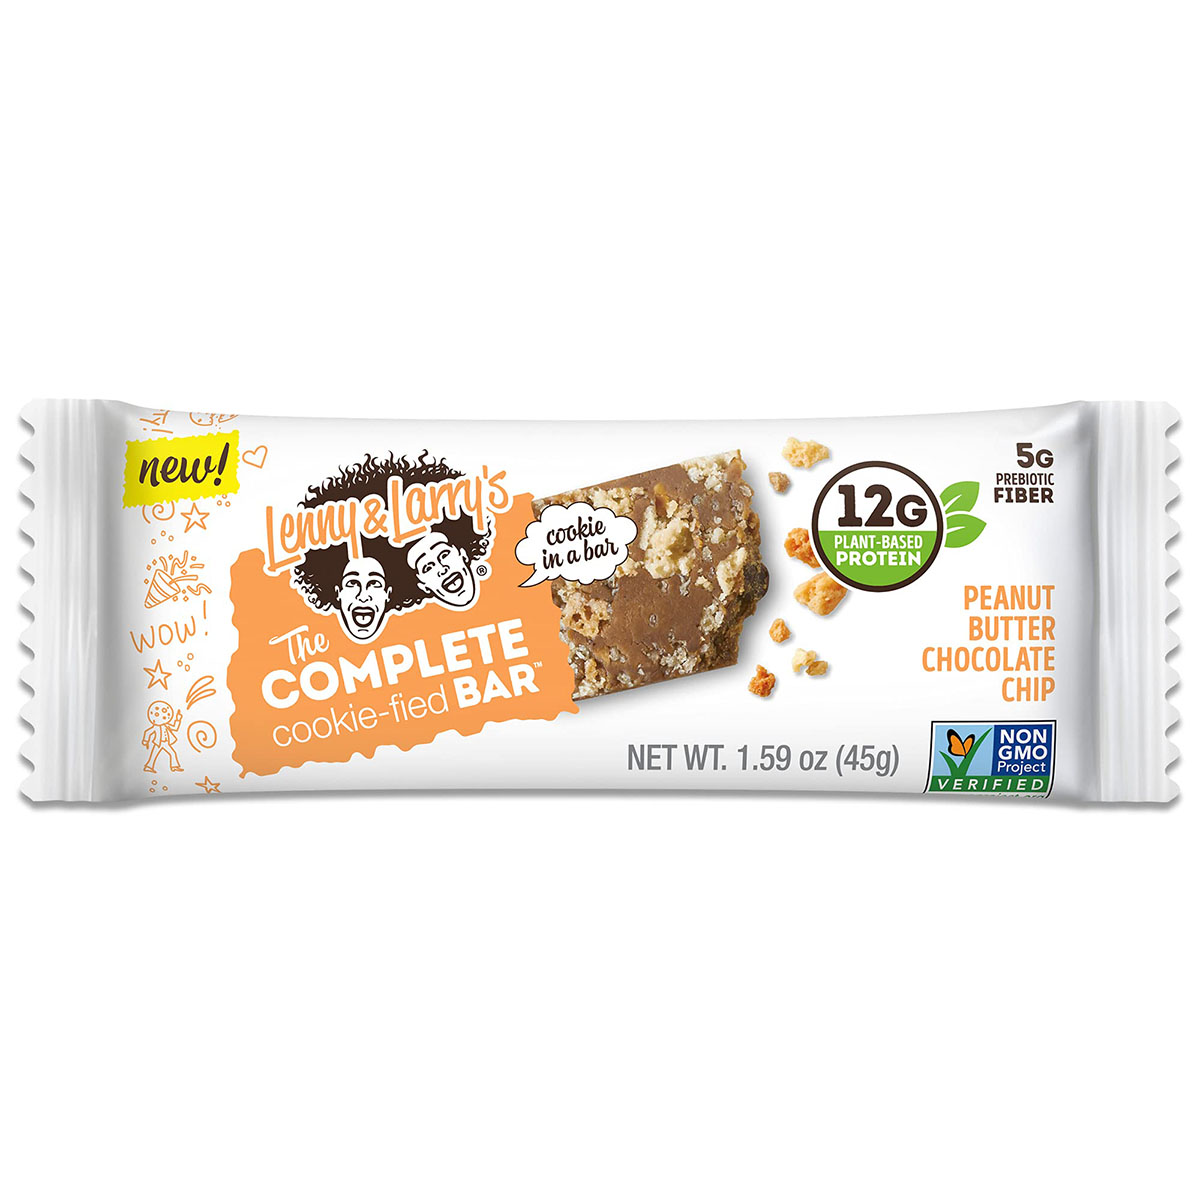 Lenny & Larry’s The Complete Cookie-fied Bar Peanut Butter Chocolate Chip 1 Bar